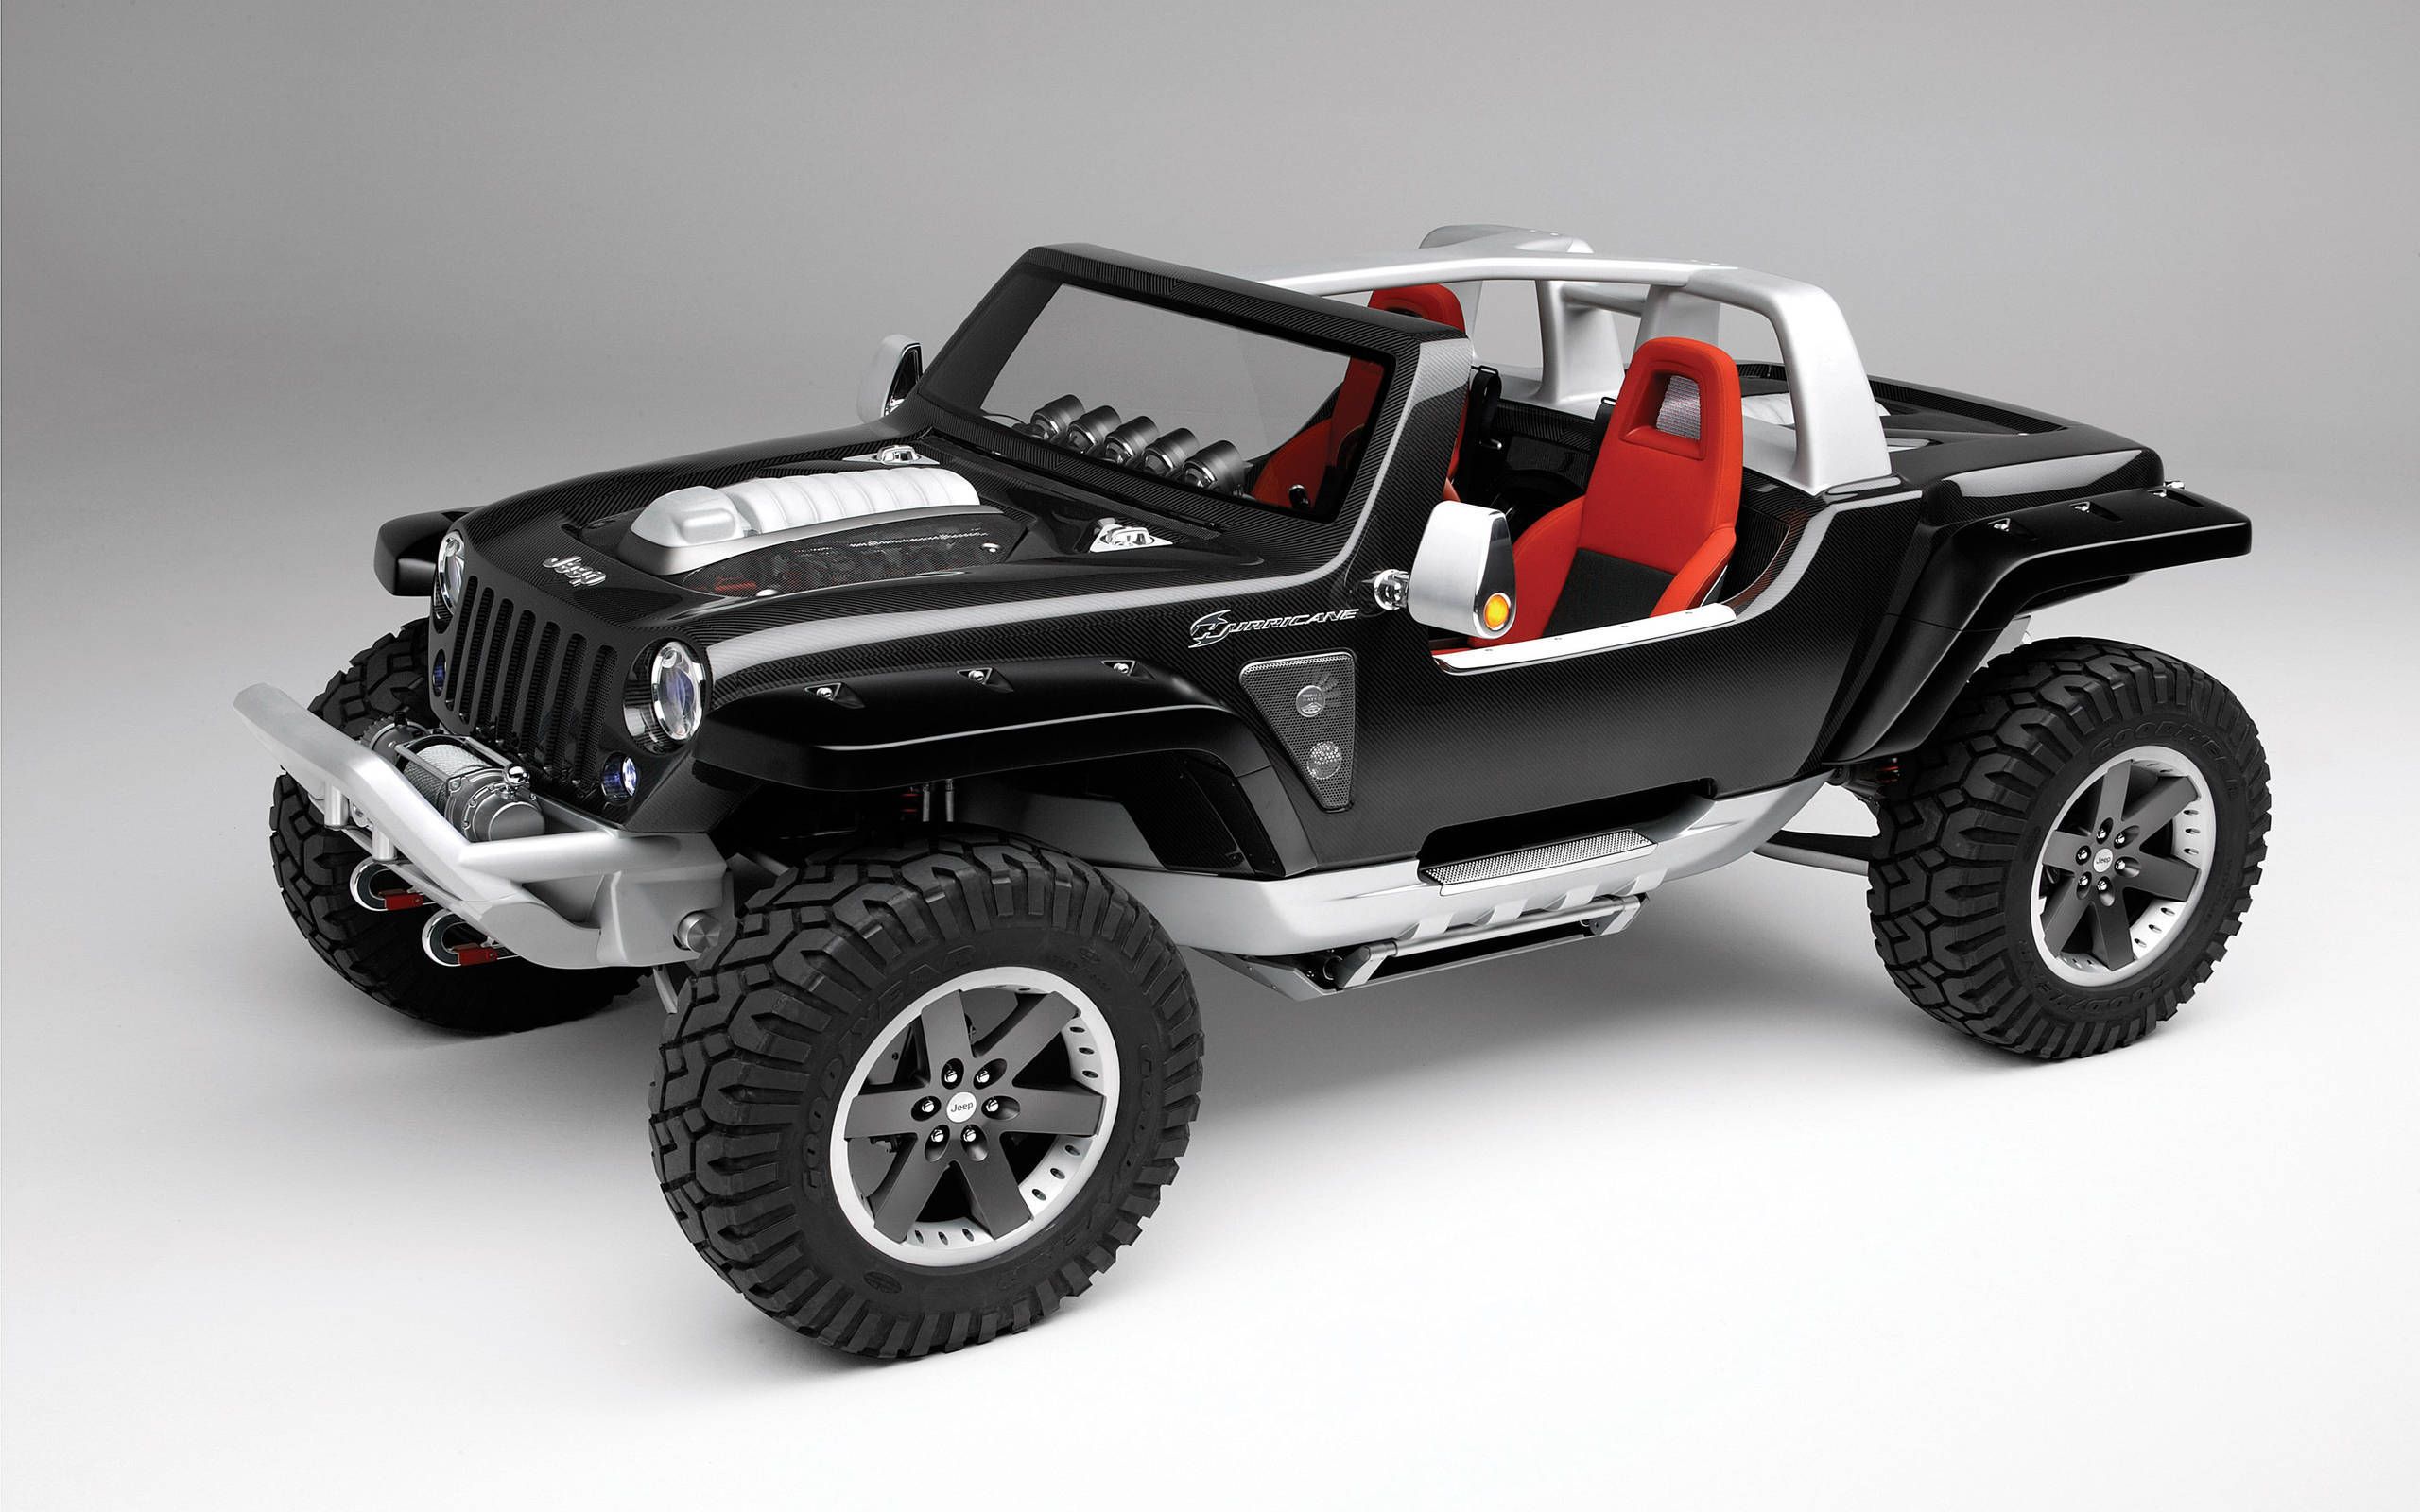 Brace yourselves, purists: The next Jeep Wrangler may get an aluminum  unibody